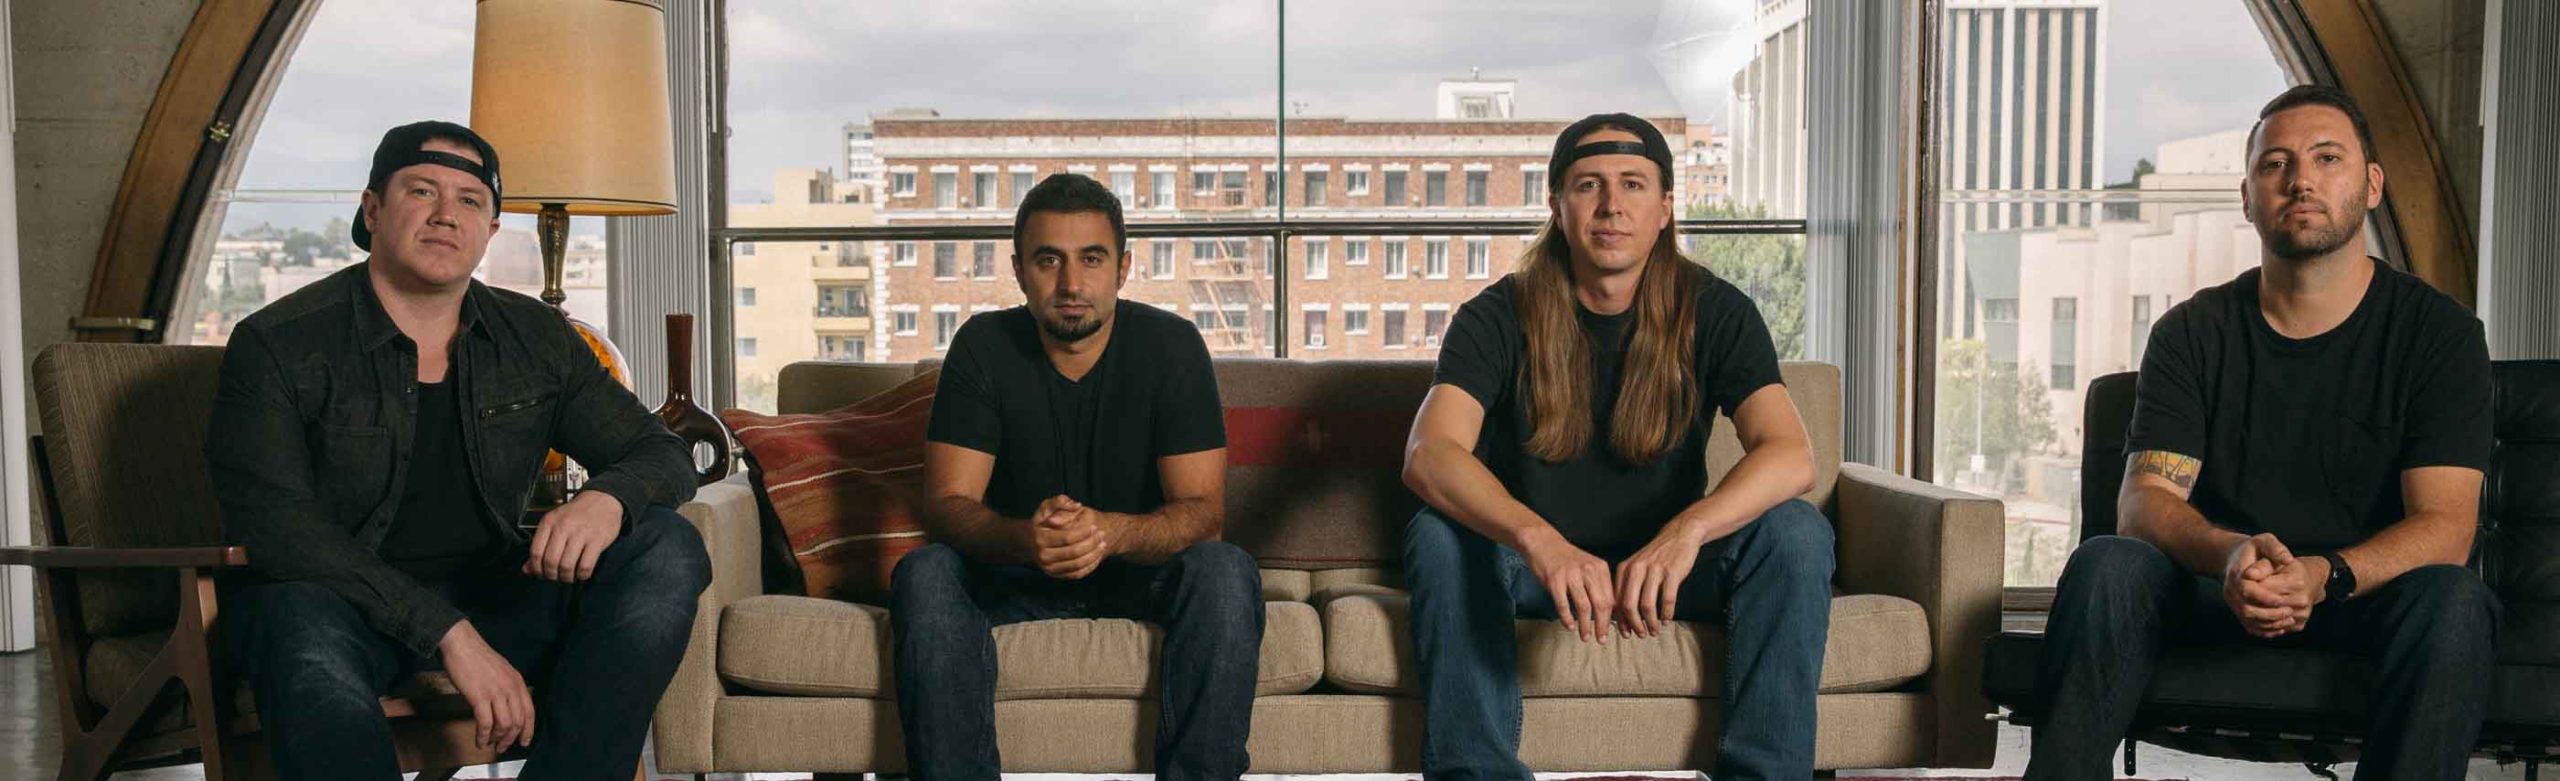 GIVEAWAY: Rebelution Tickets Image